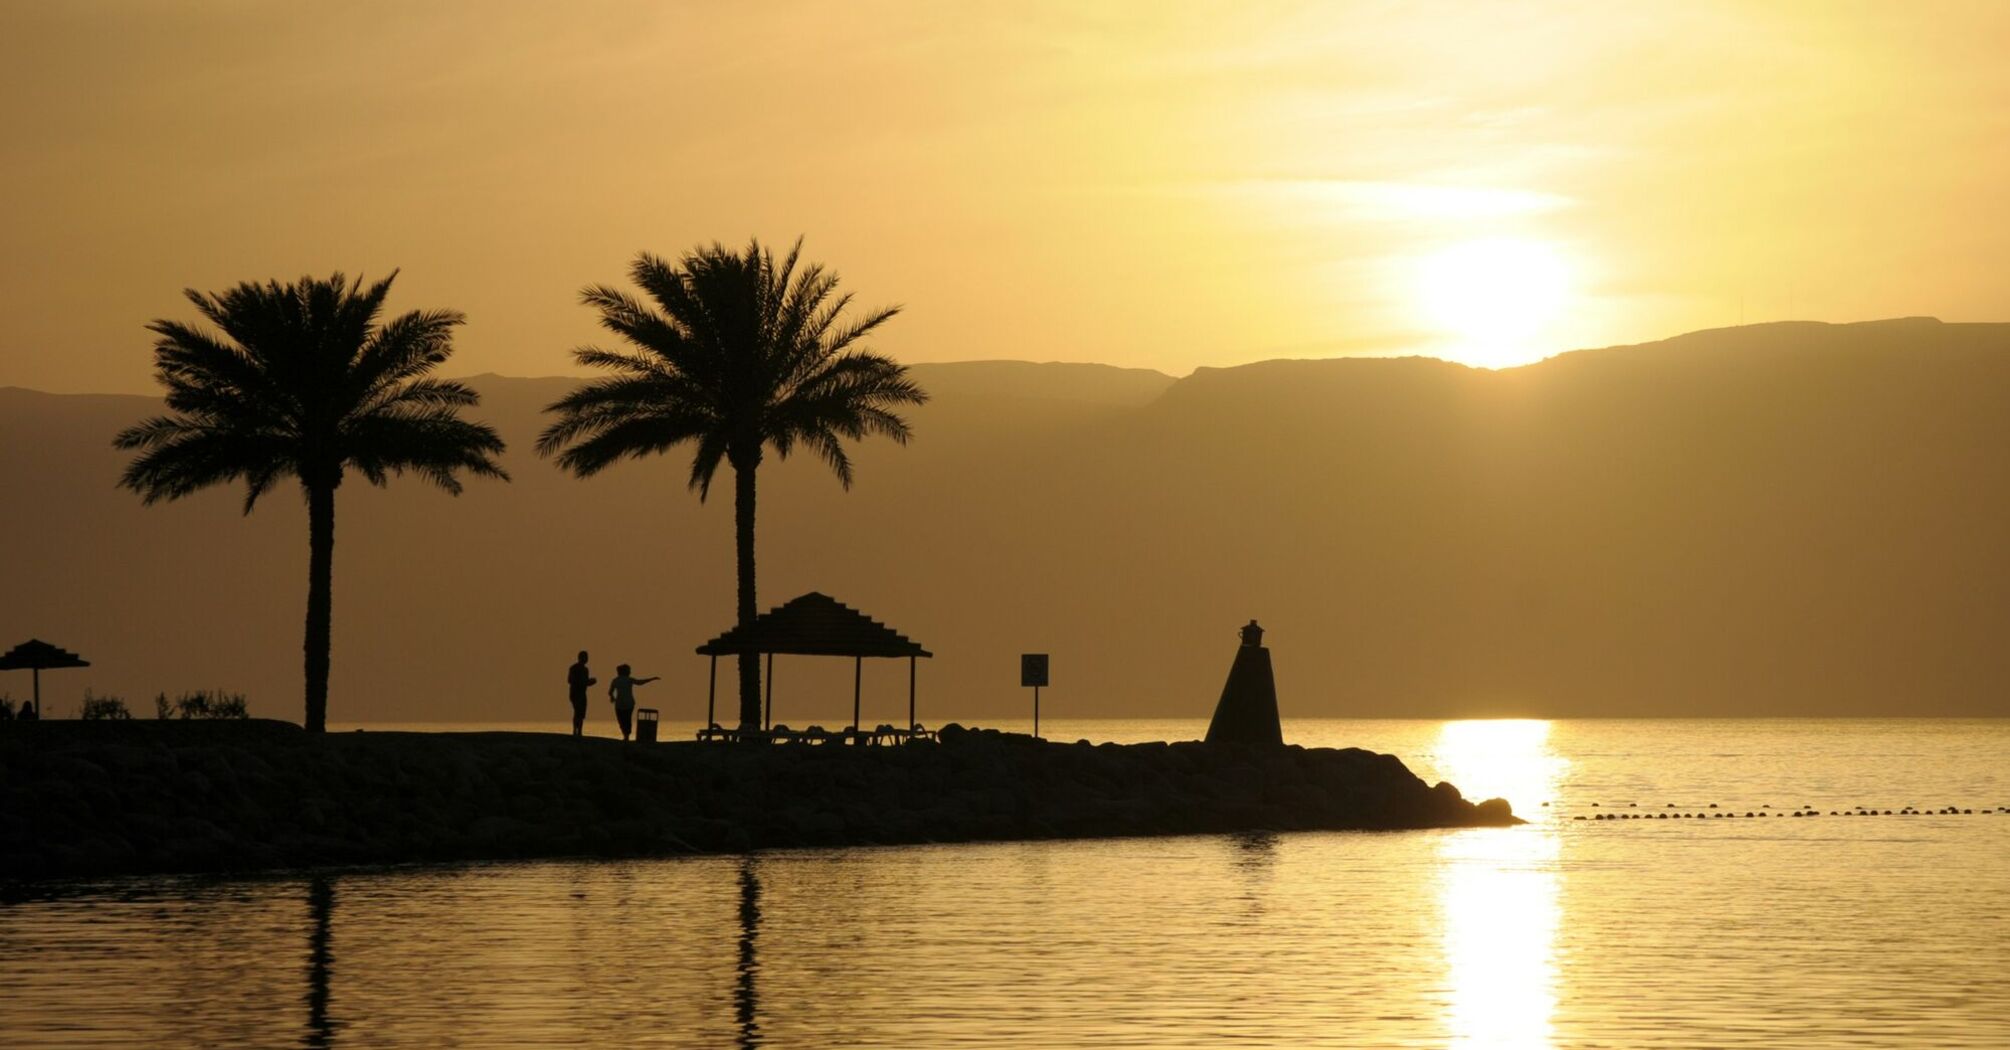 Silhouettes of palm trees and a gazebo against a sunset over the tranquil waters of the Gulf of Aqaba